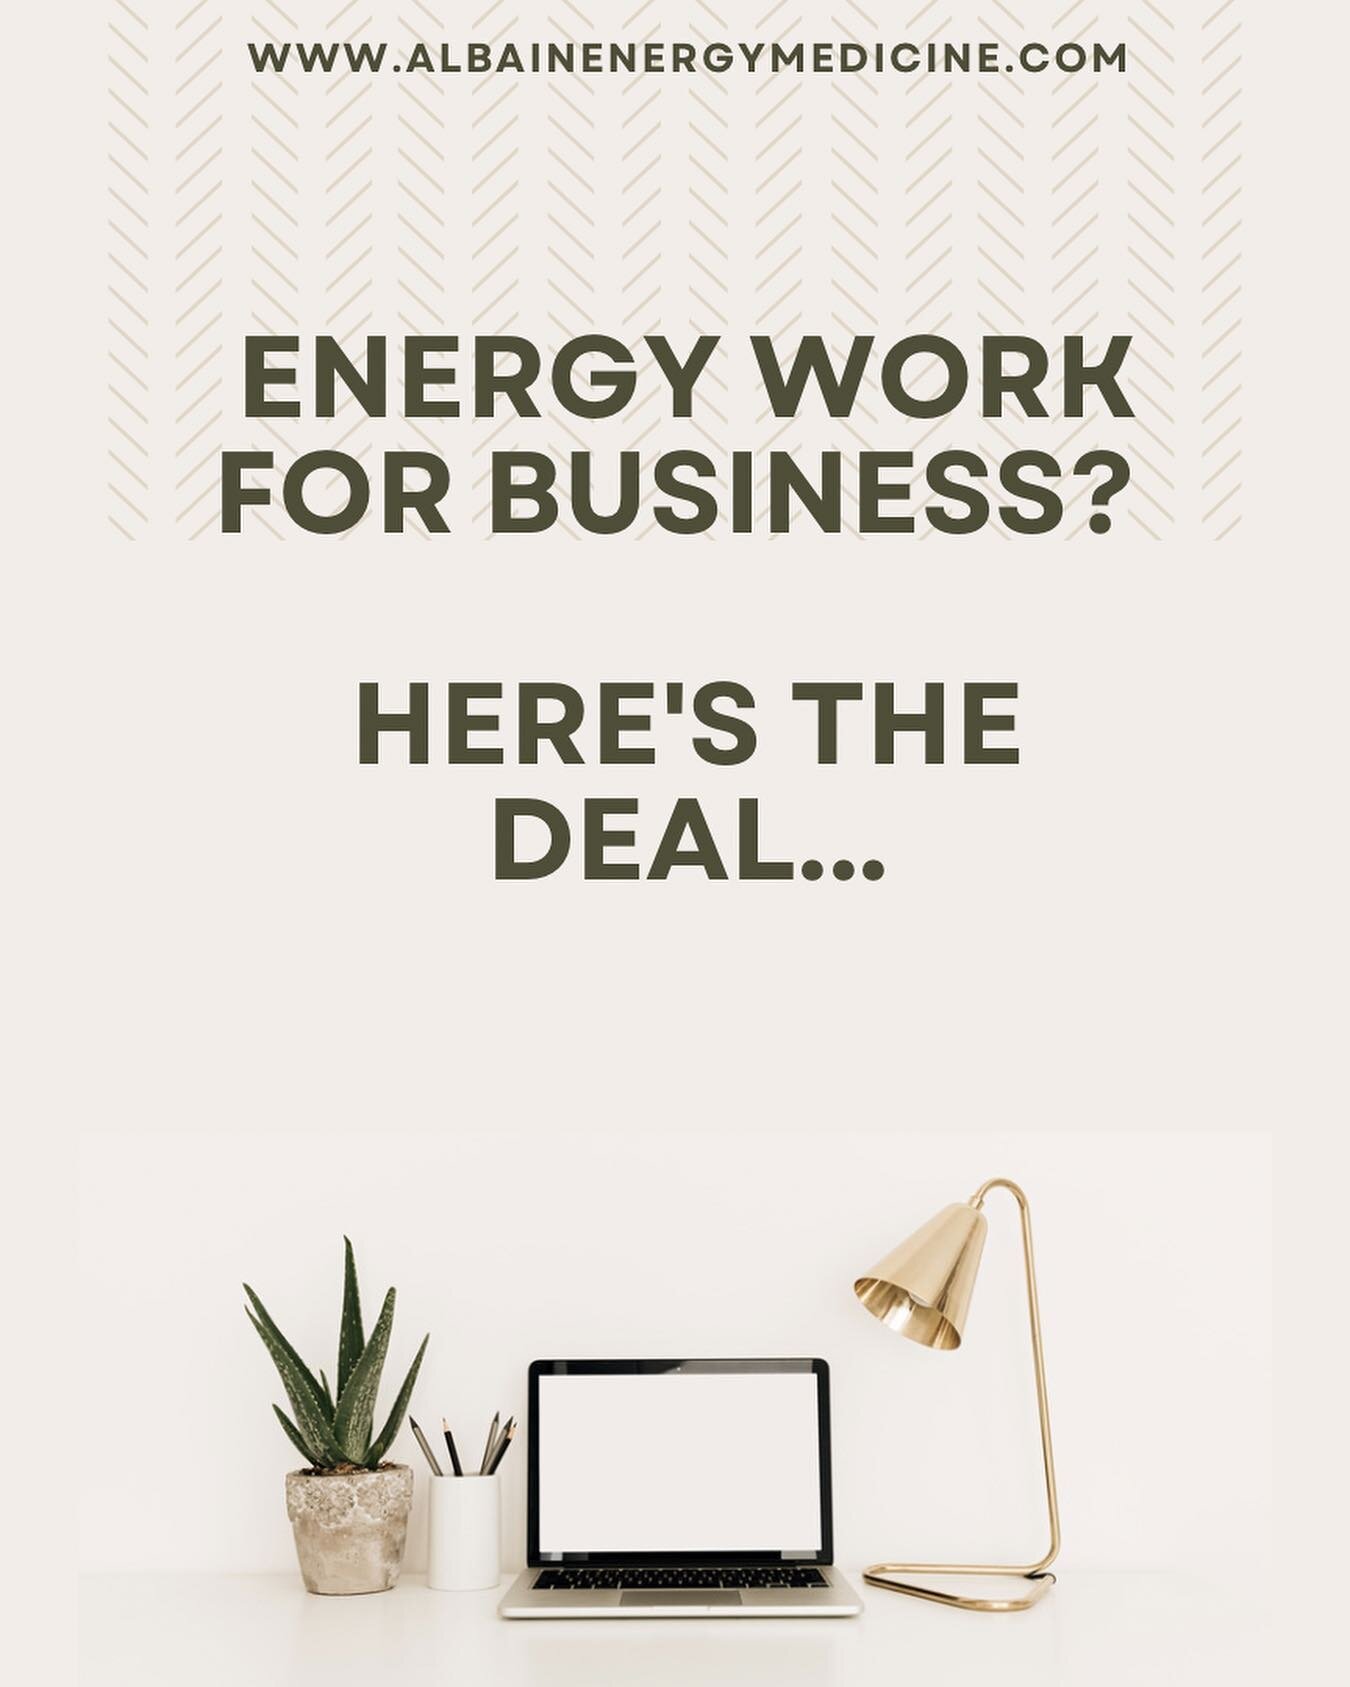 Energy Work represents the frontline of innovative possibilities&hellip; this isn&rsquo;t about healing any more, it&rsquo;s about radically transforming our industries, our organizations, our projects, and our fundamental ways of being.

Visit www.a